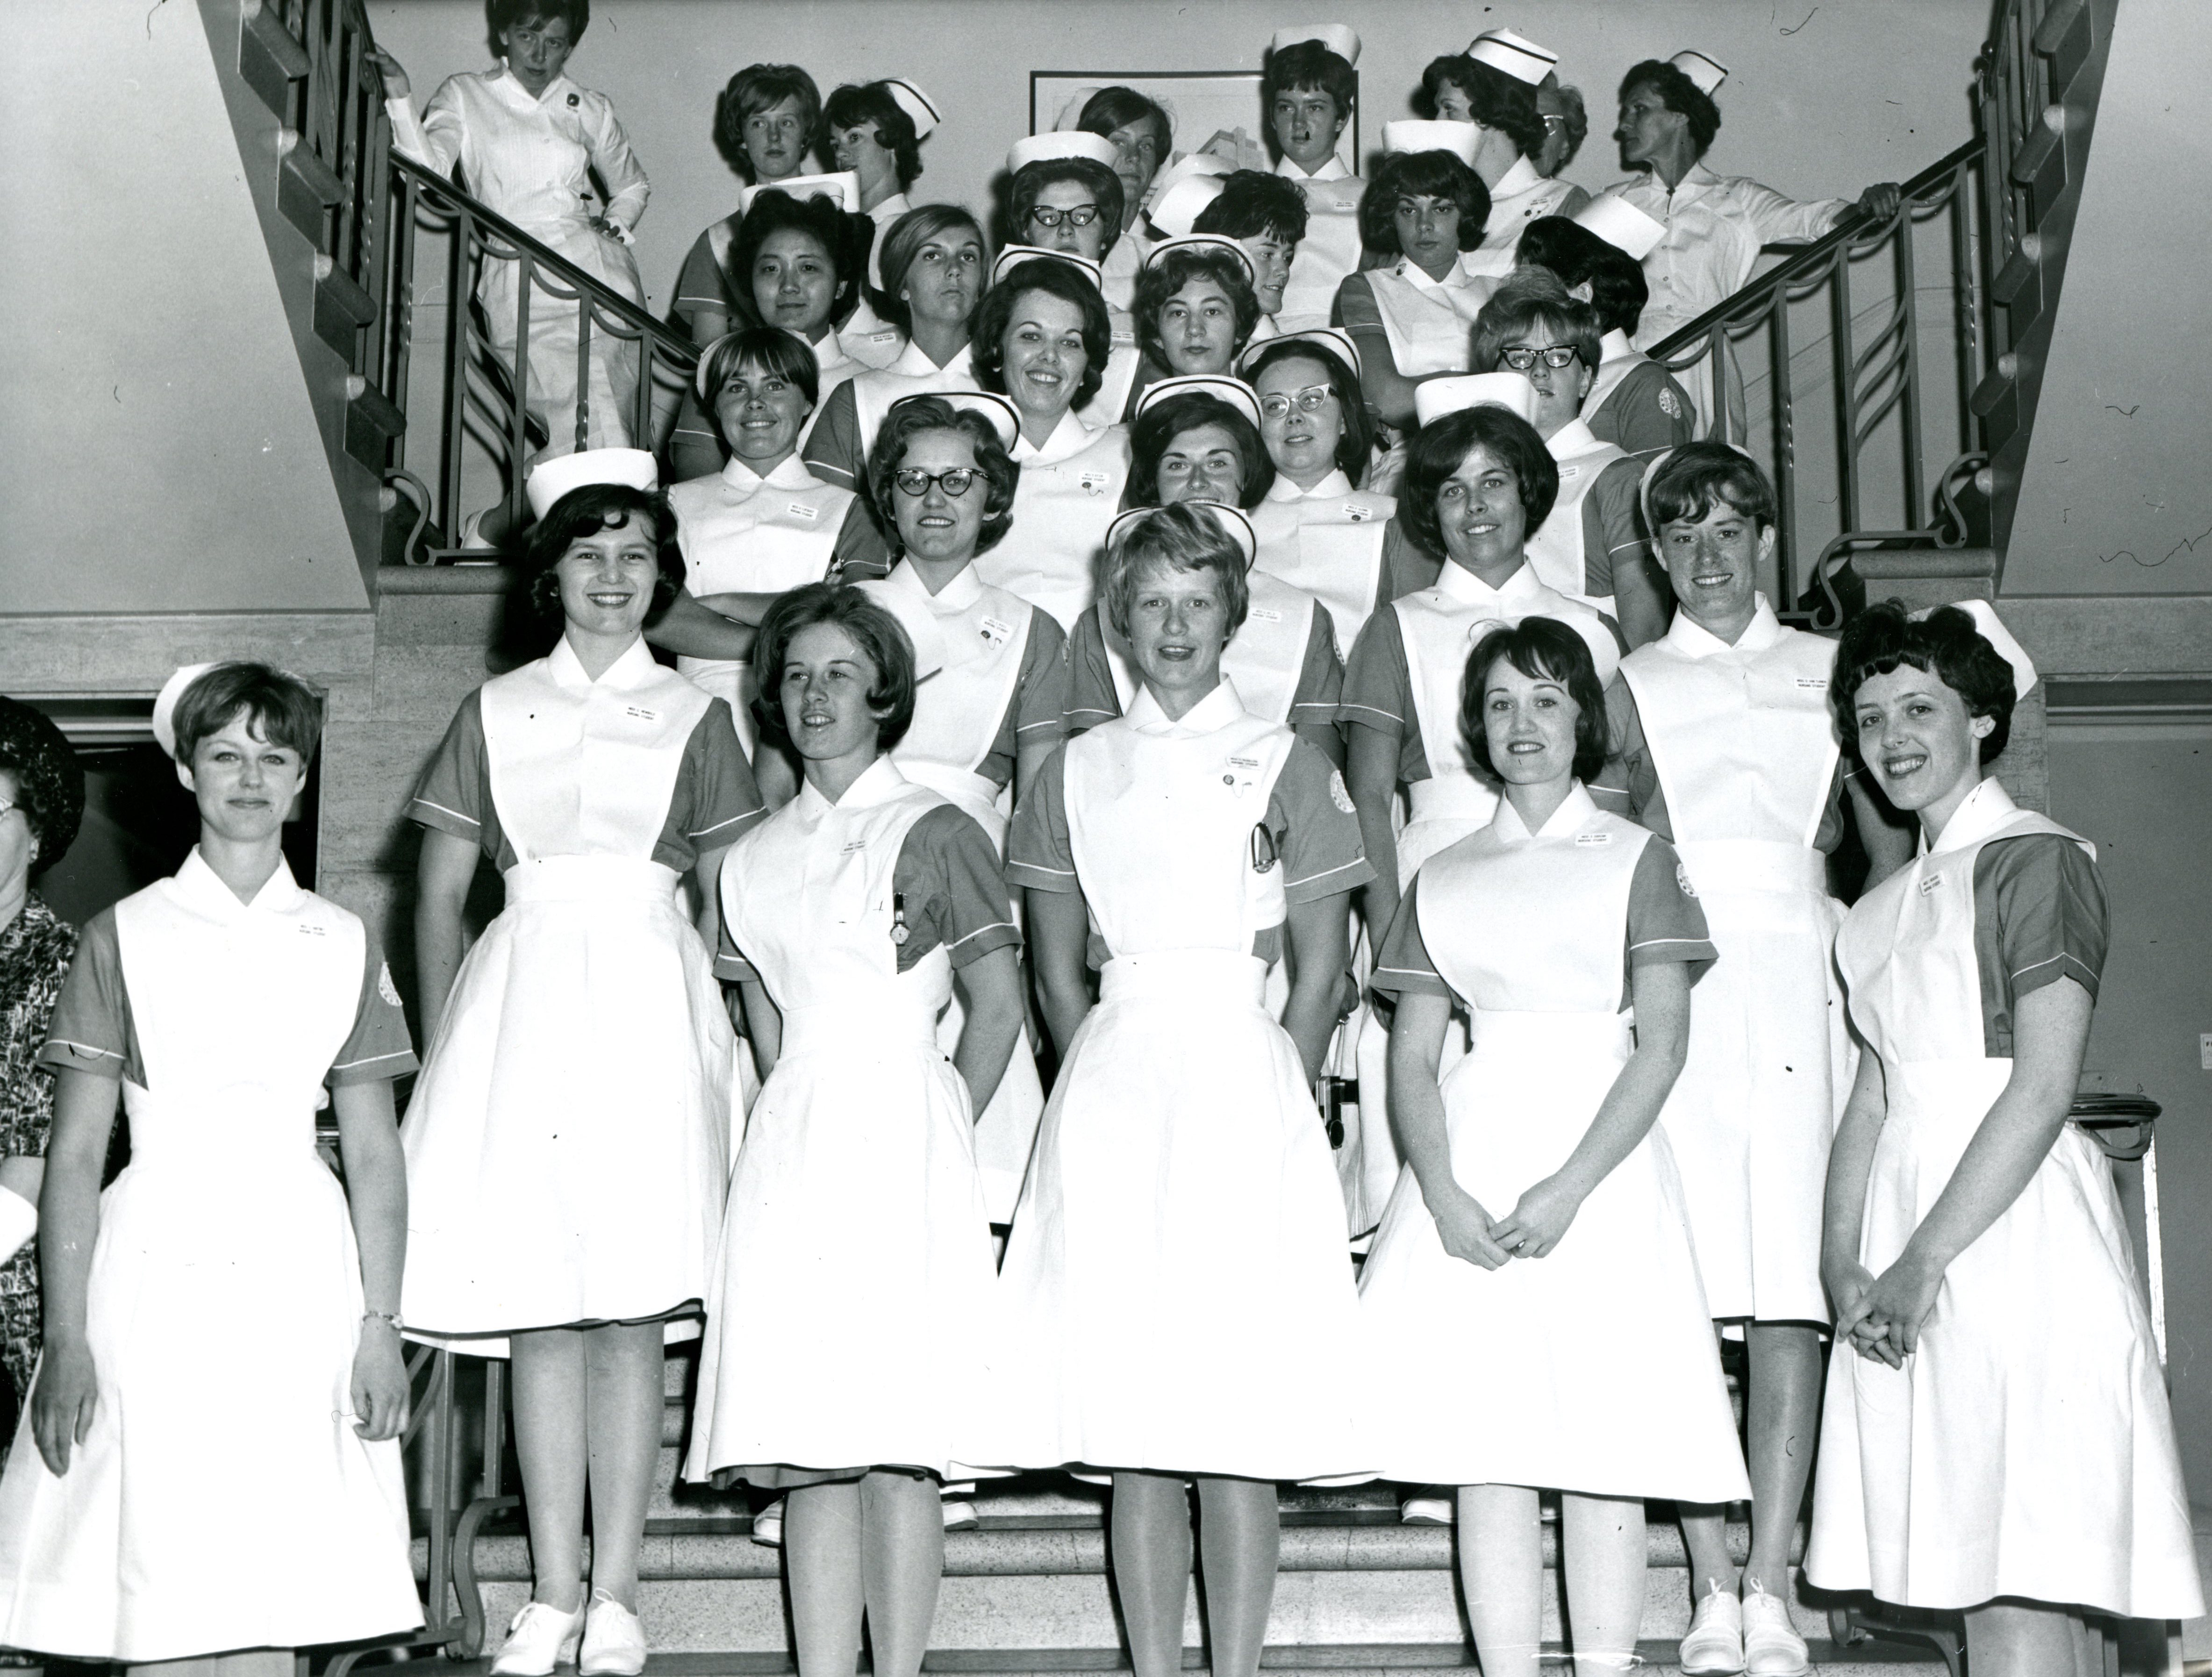 A large group of women pose formally for a photograph on a set of stairs. They are wearing nurses' uniforms with caps.